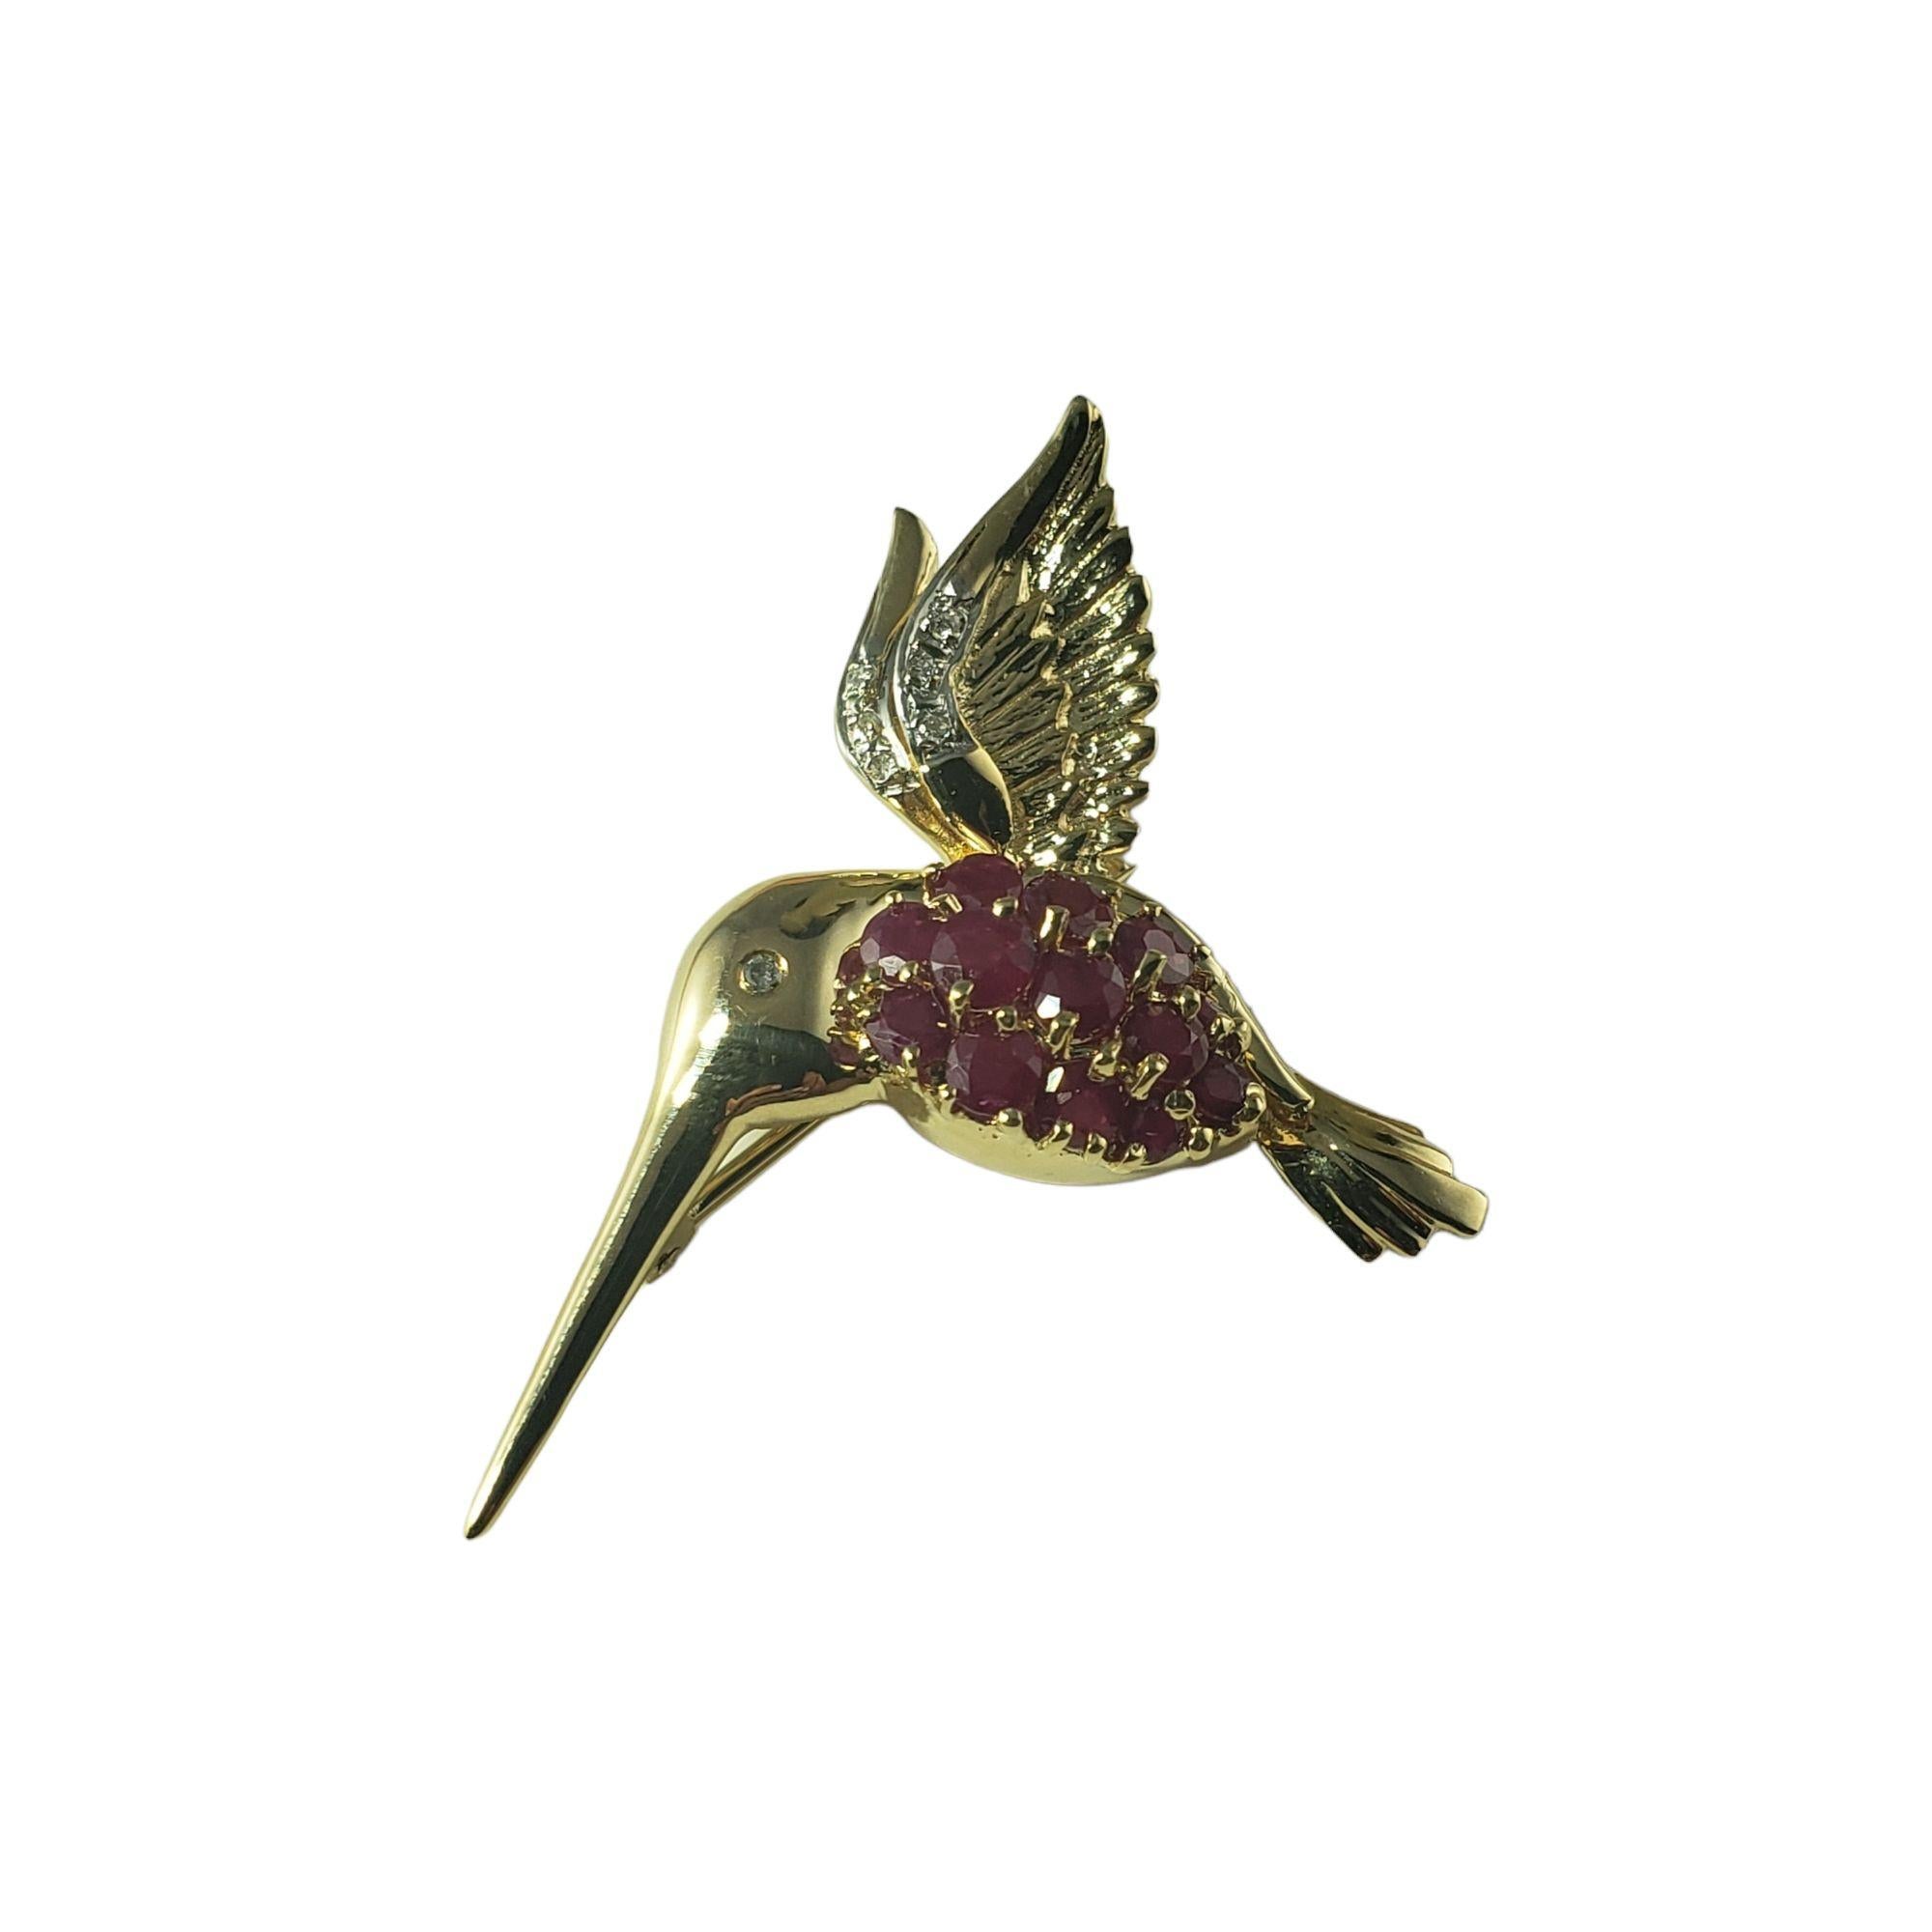 Vintage 14 Karat Yellow Gold Ruby and Diamond Brooch/Pendant JAGi Certified-

This lovely hummingbird brooch features seven round brilliant cut diamonds and 13 round rubies set in beautifully detailed 14K yellow gold.  Can be worn as a brooch or a